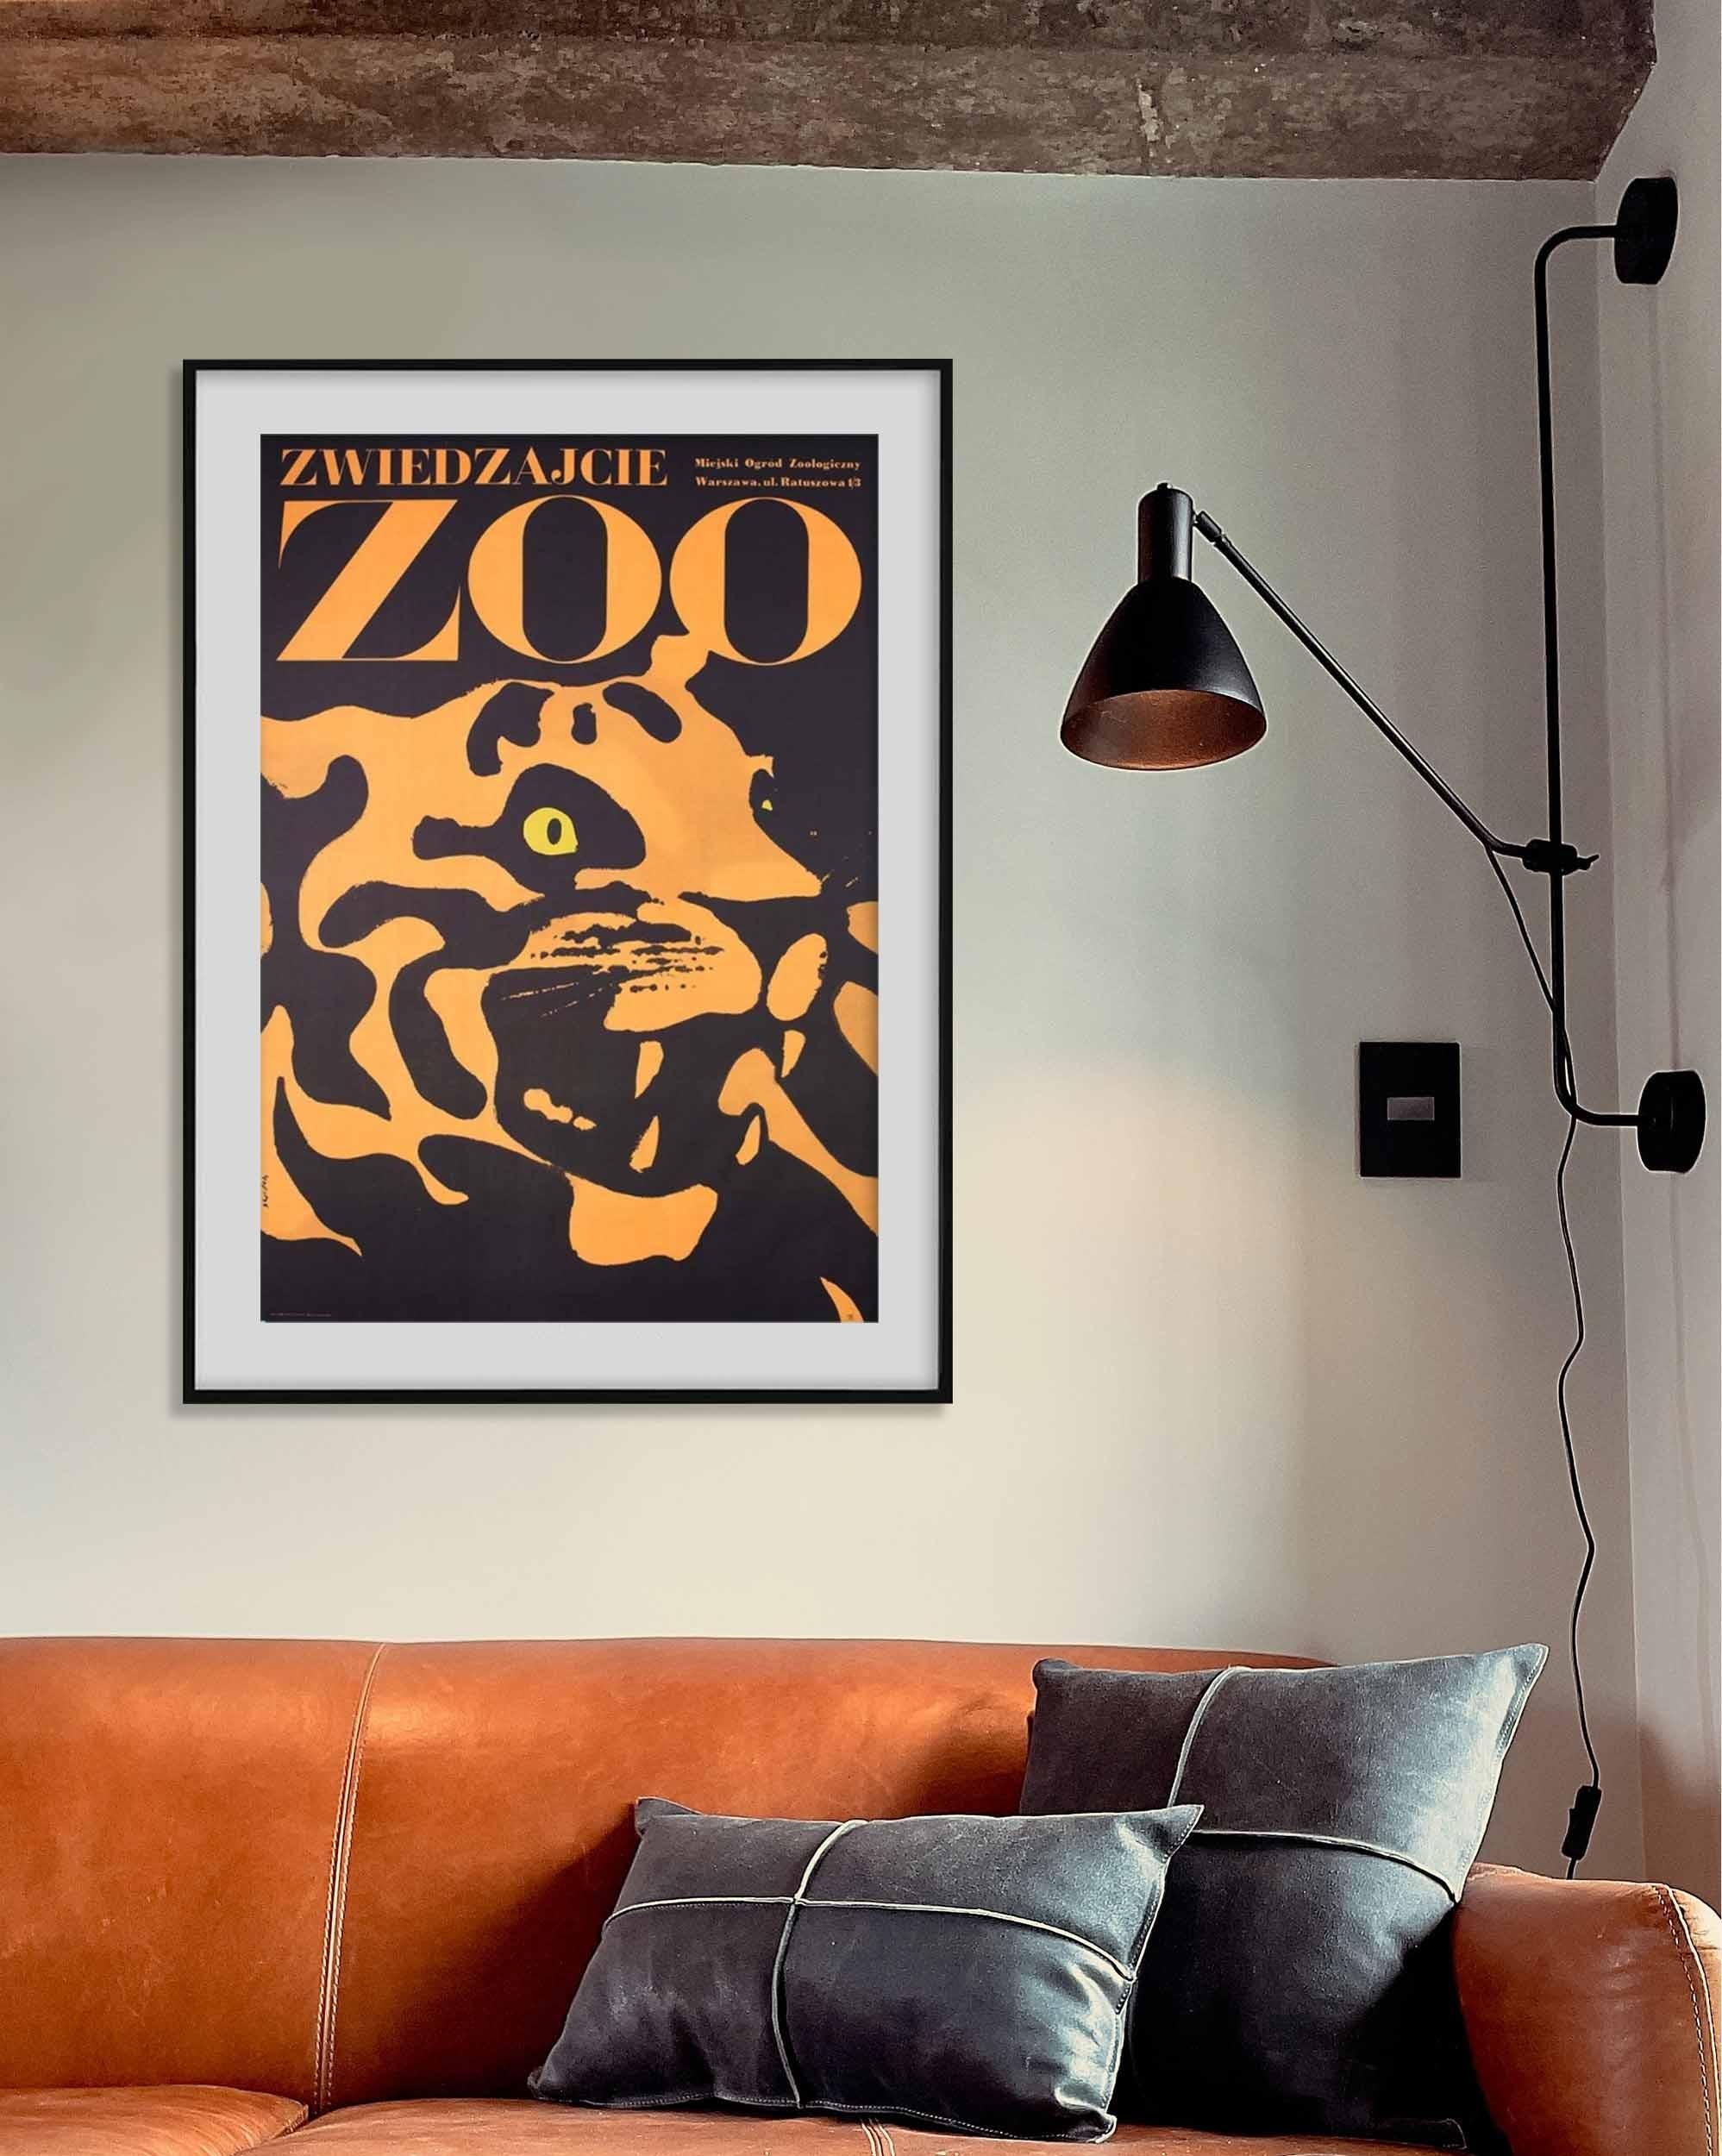 This bold and beautiful original vintage 1967 poster ‘Zwiedzajcie Zoo’ (Visit the Zoo), featuring a zoo tiger, was one of a series designed by the legendary Polish poster artist Waldemar Swierzy to promote the municipal zoo in Warsaw.

Swierzy’s zoo